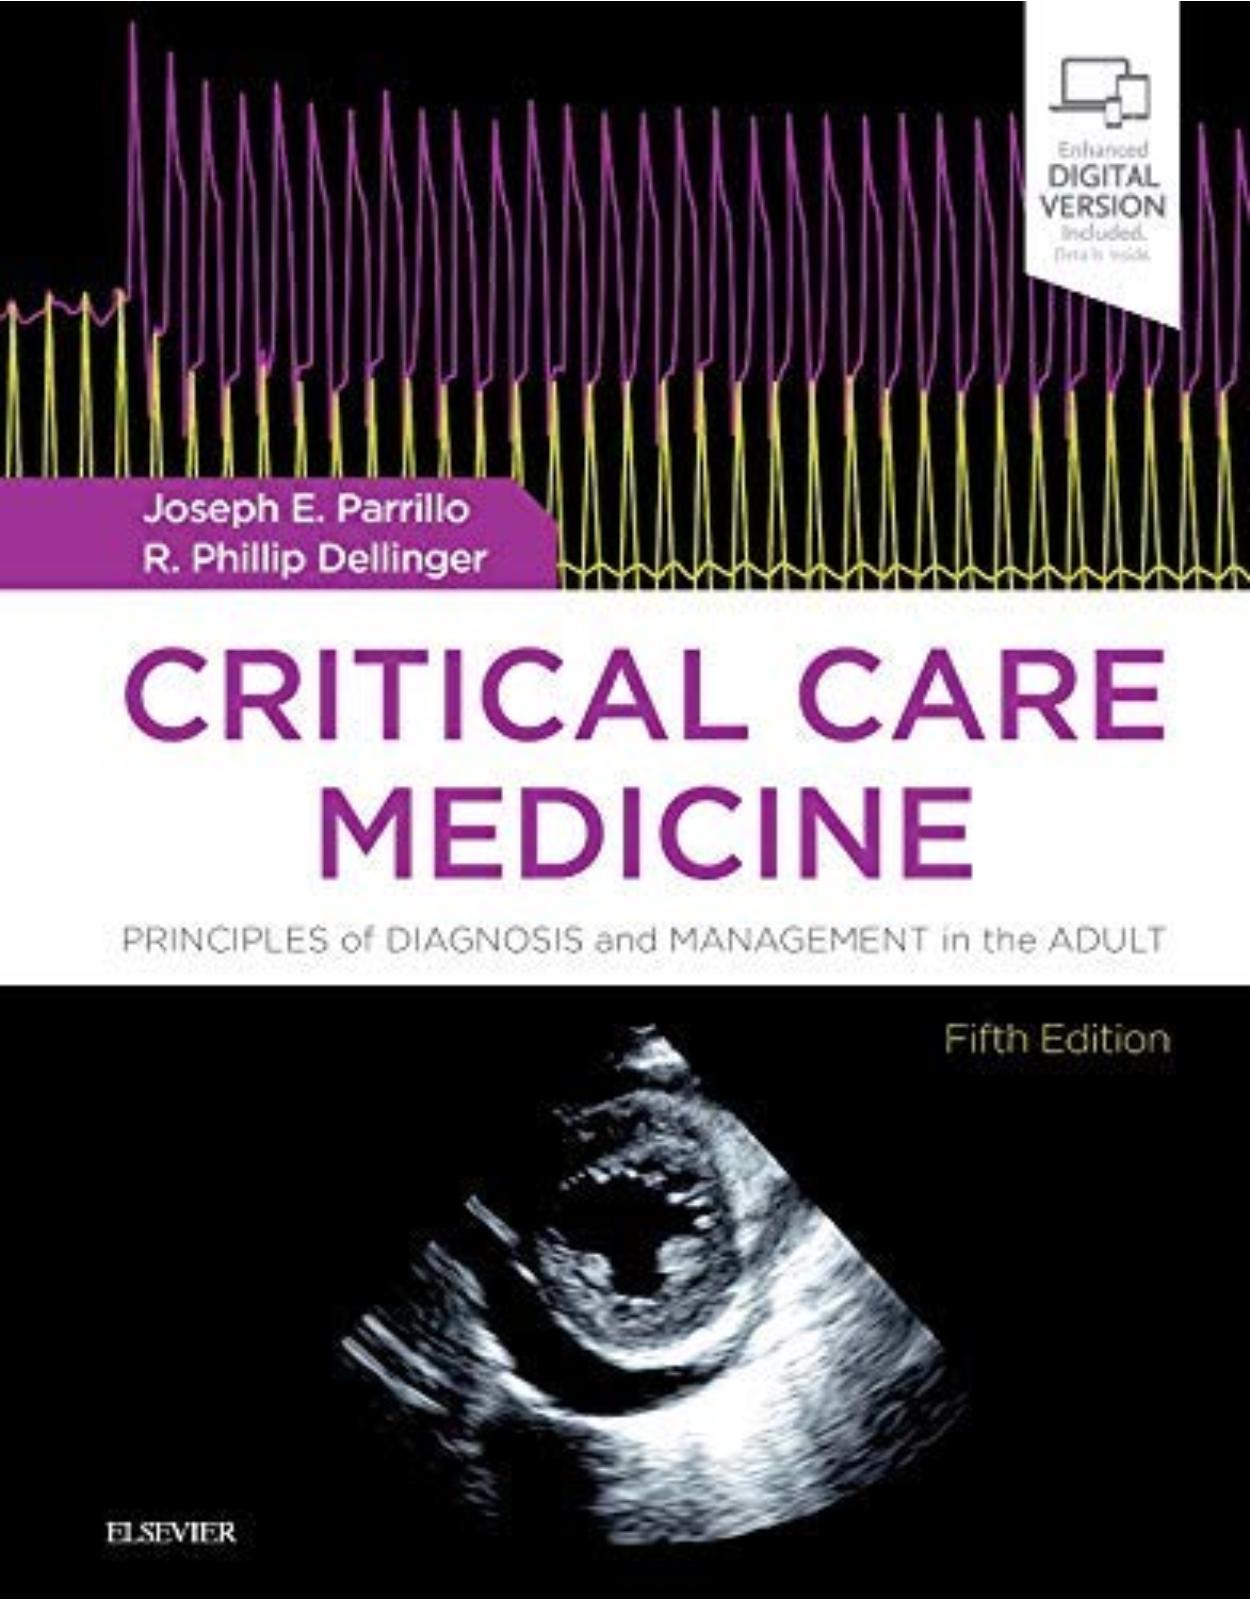 Critical Care Medicine: Principles of Diagnosis and Management in the Adult, 5e